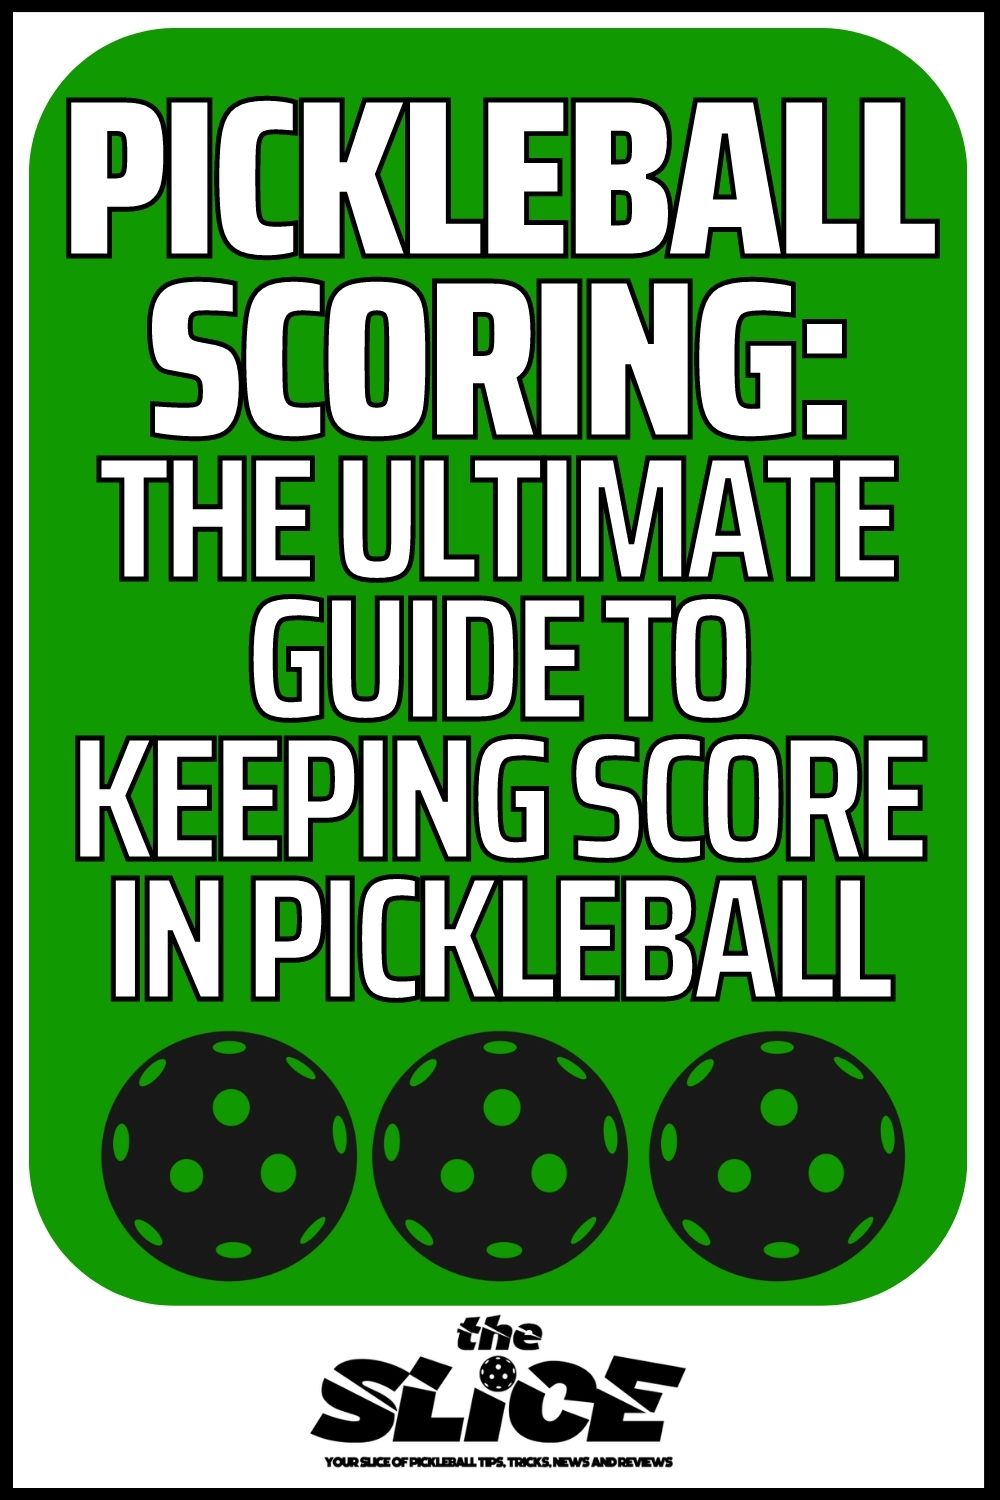 pickleball scoring the ultimate guide to keeping score in pickleball (1)